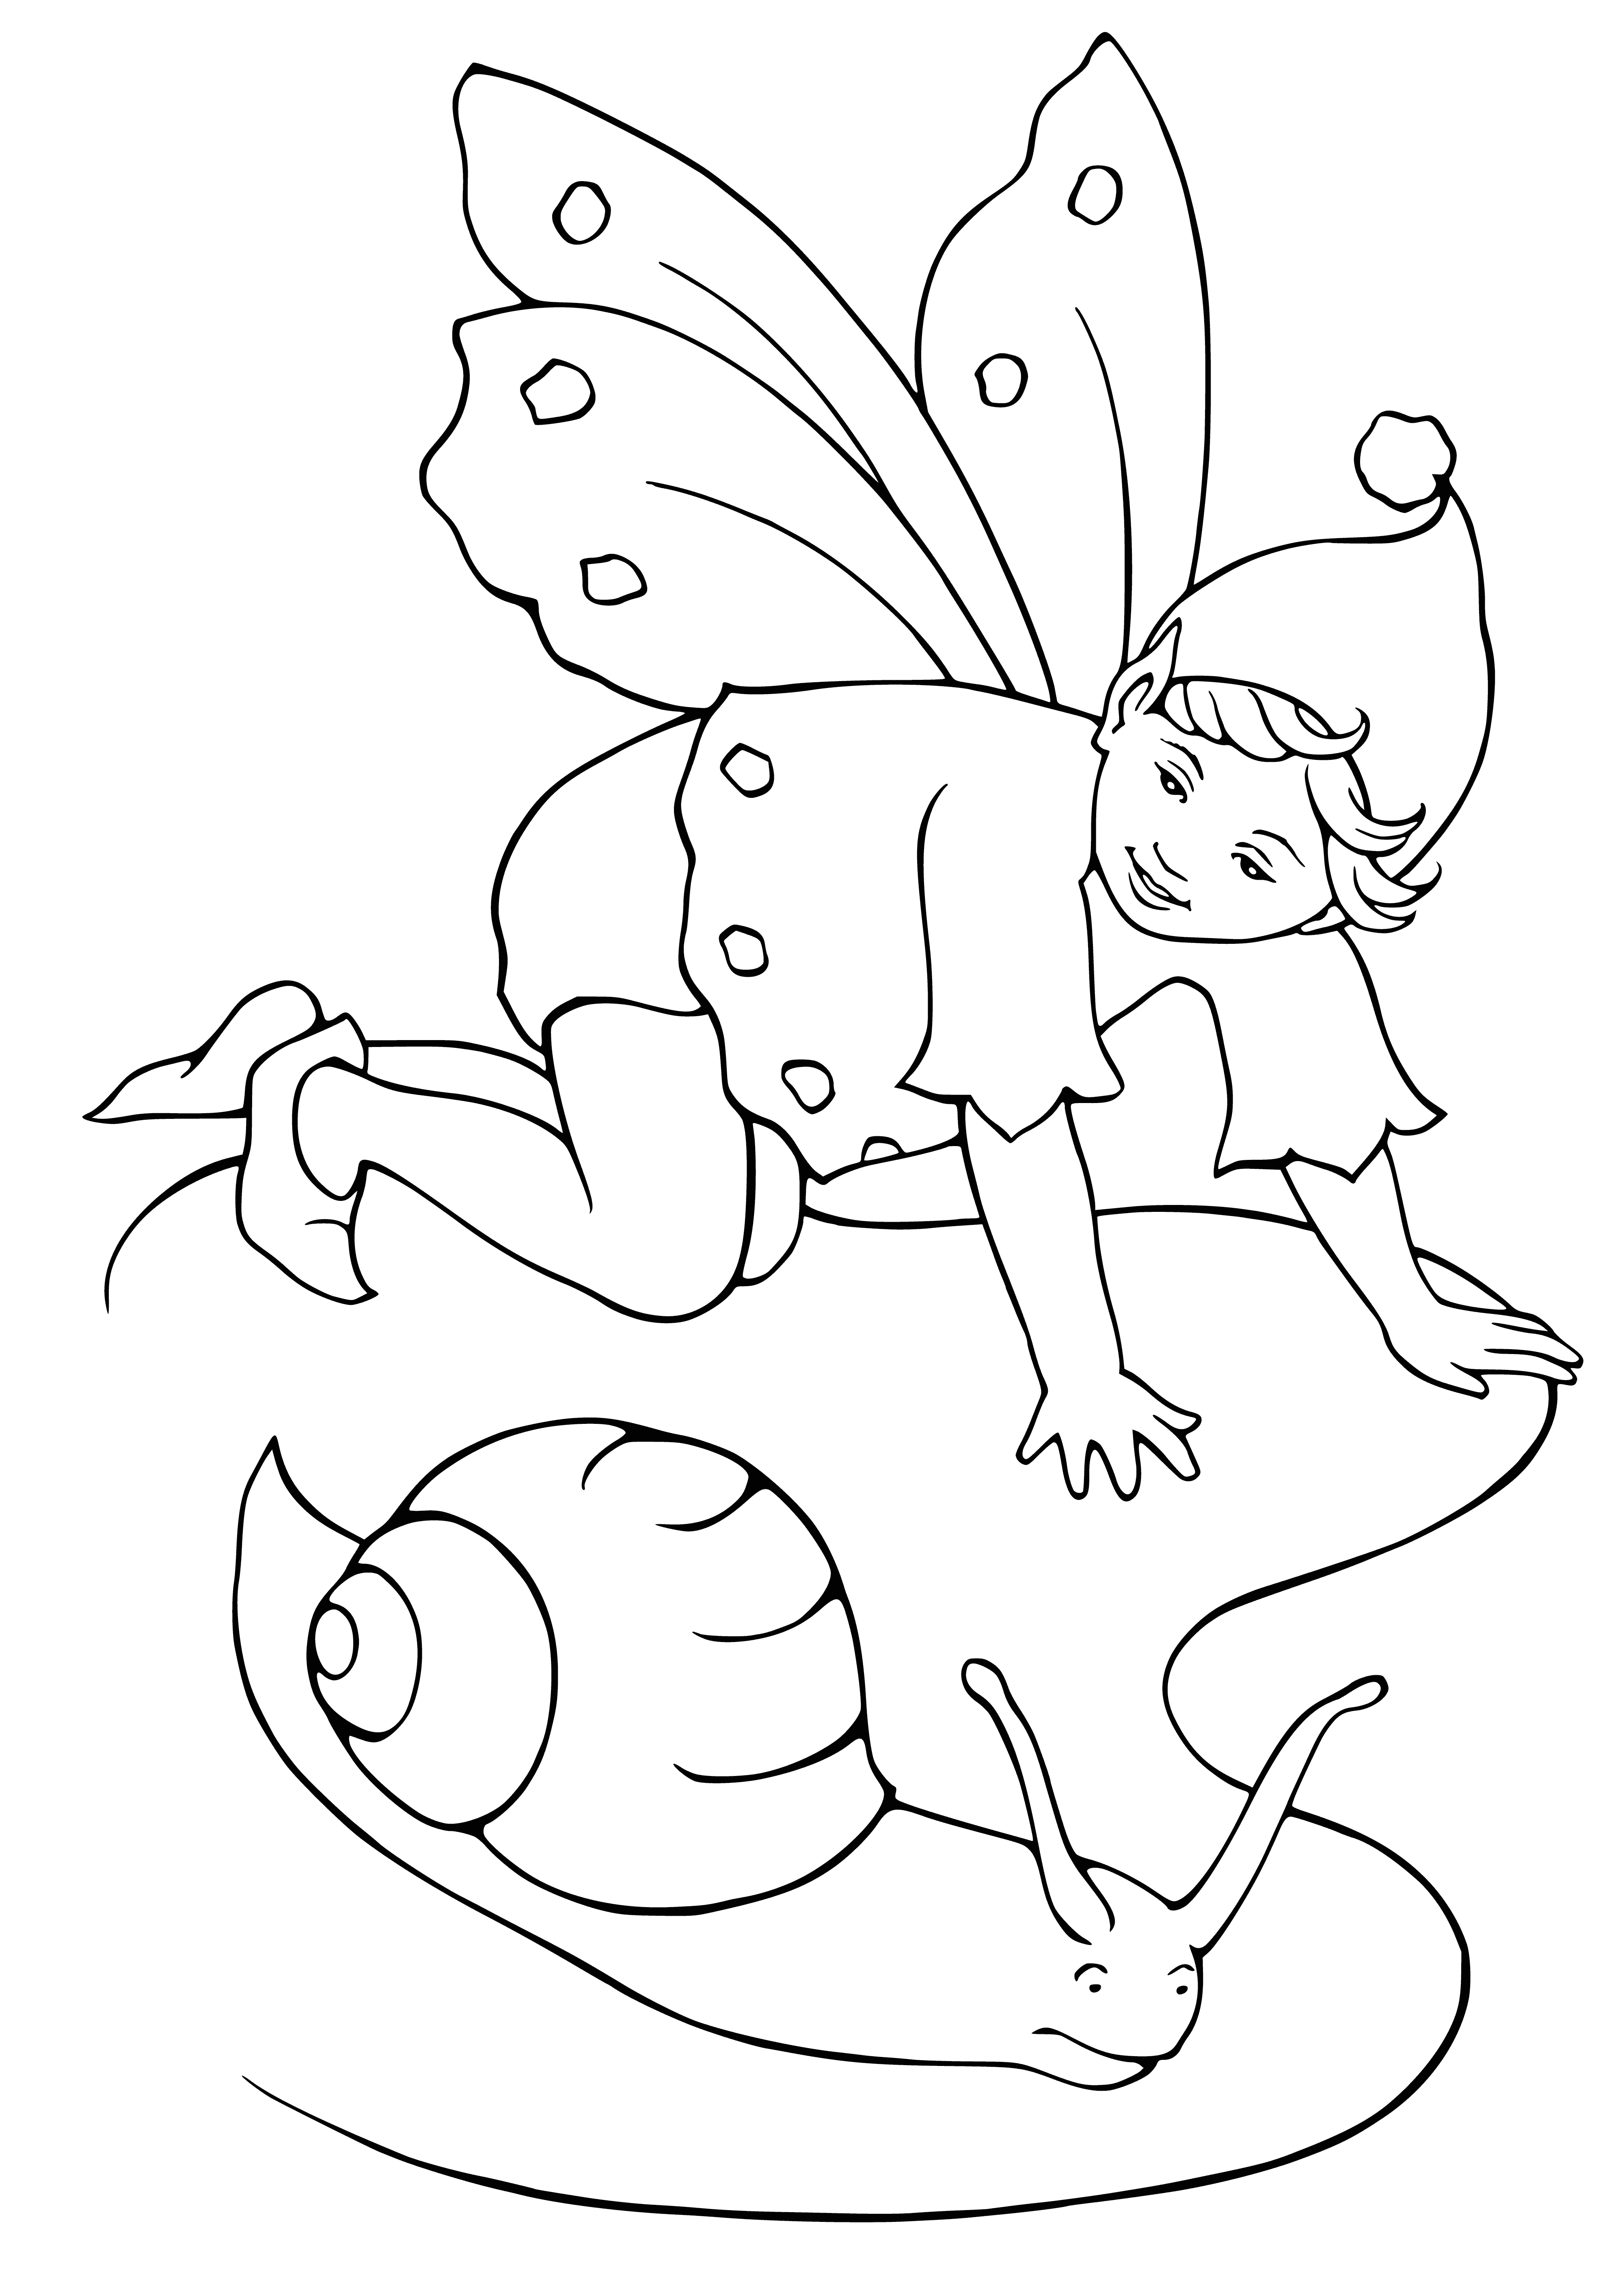 coloring page: Elf in green tunic watching a snail crawl slowly. Wonderment in his eyes. A peaceful scene. #ColoringPage